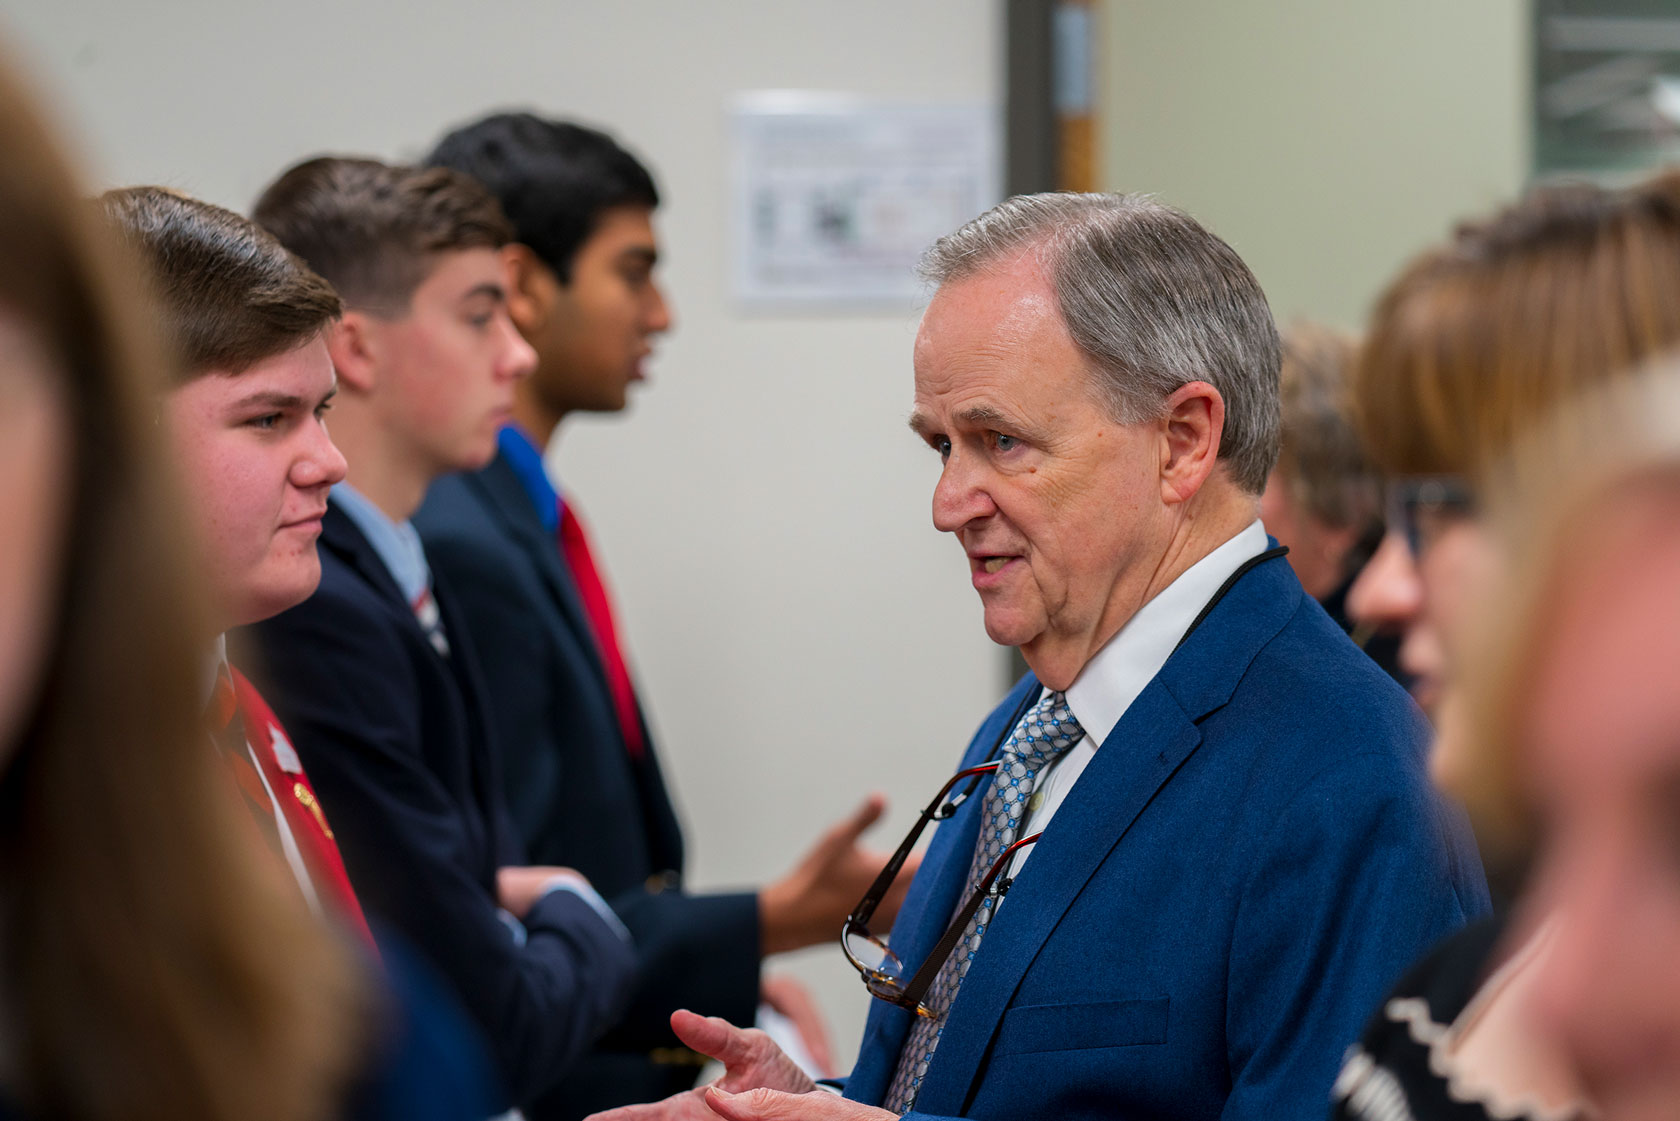 Lee Todd, a member of the Kentucky Board of Education, talks with representatives of career and technical student organizations who were recognized at a KBE meeting in Frankfort.